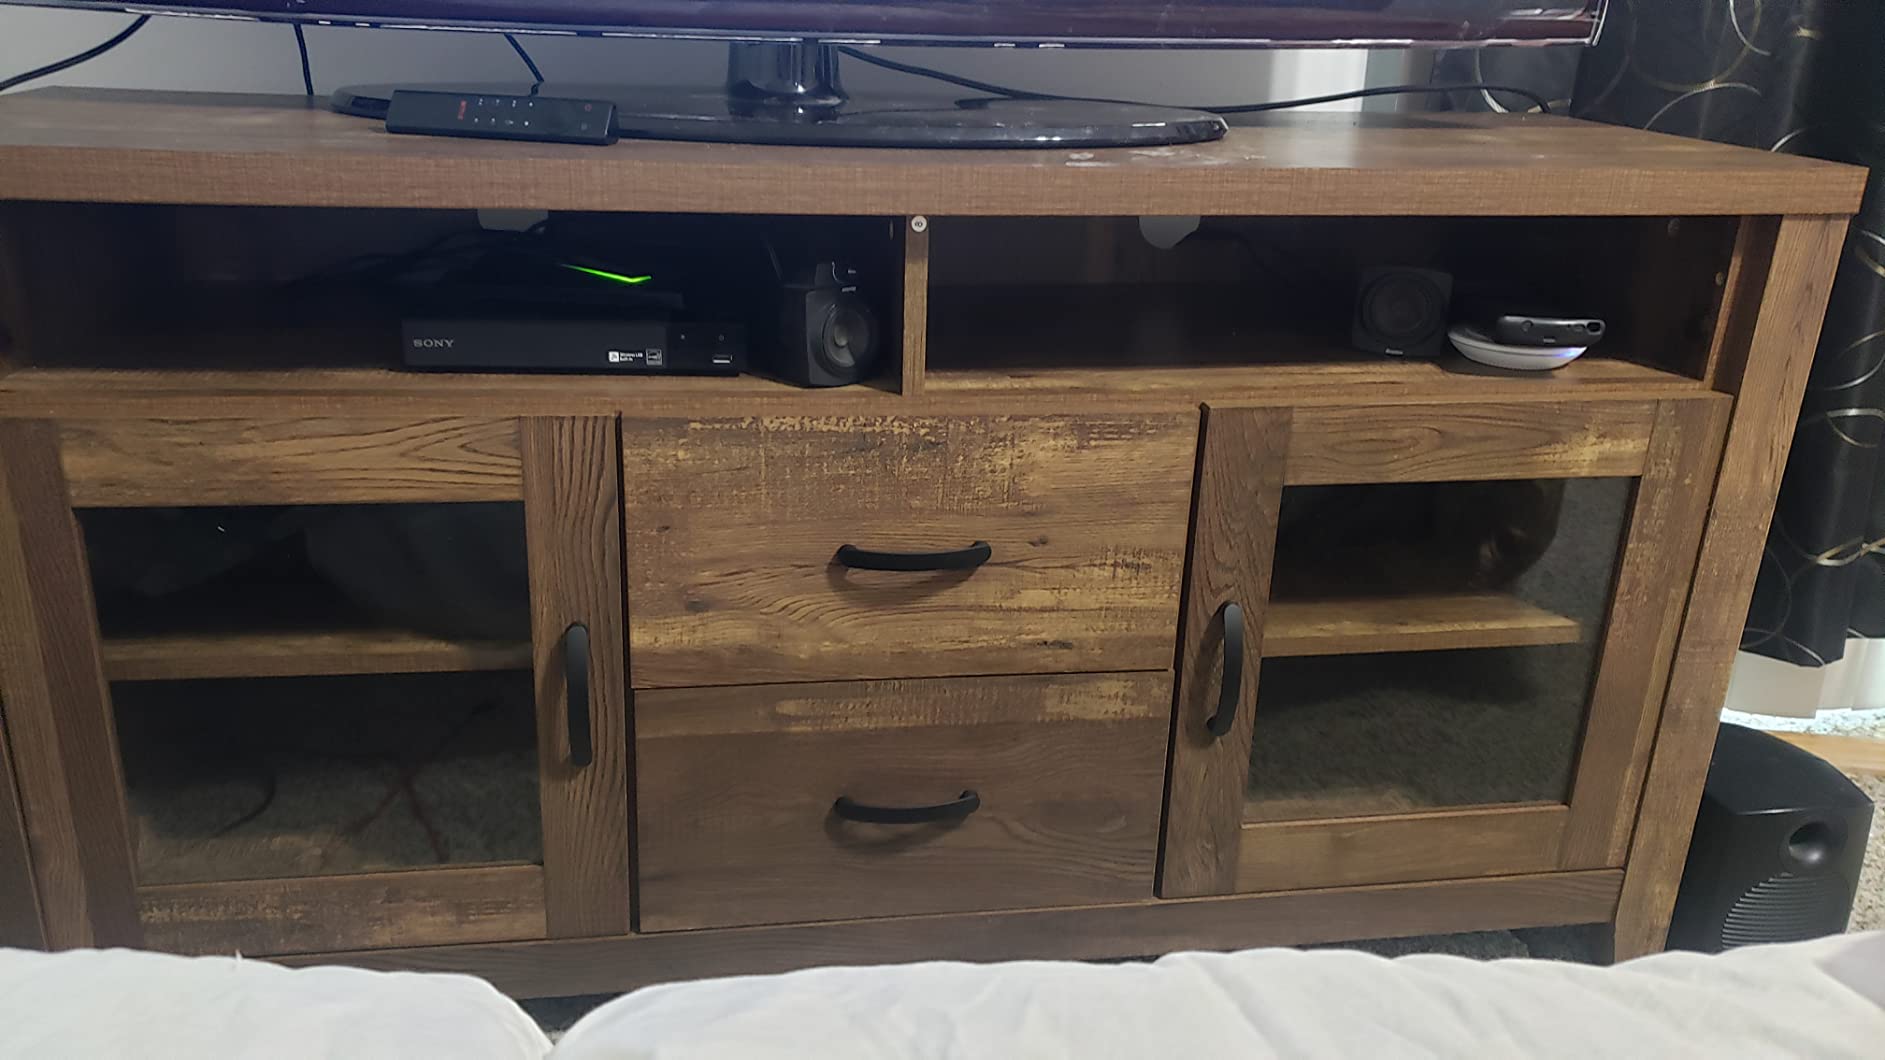 Great sturdy TV stand, but directions were awful